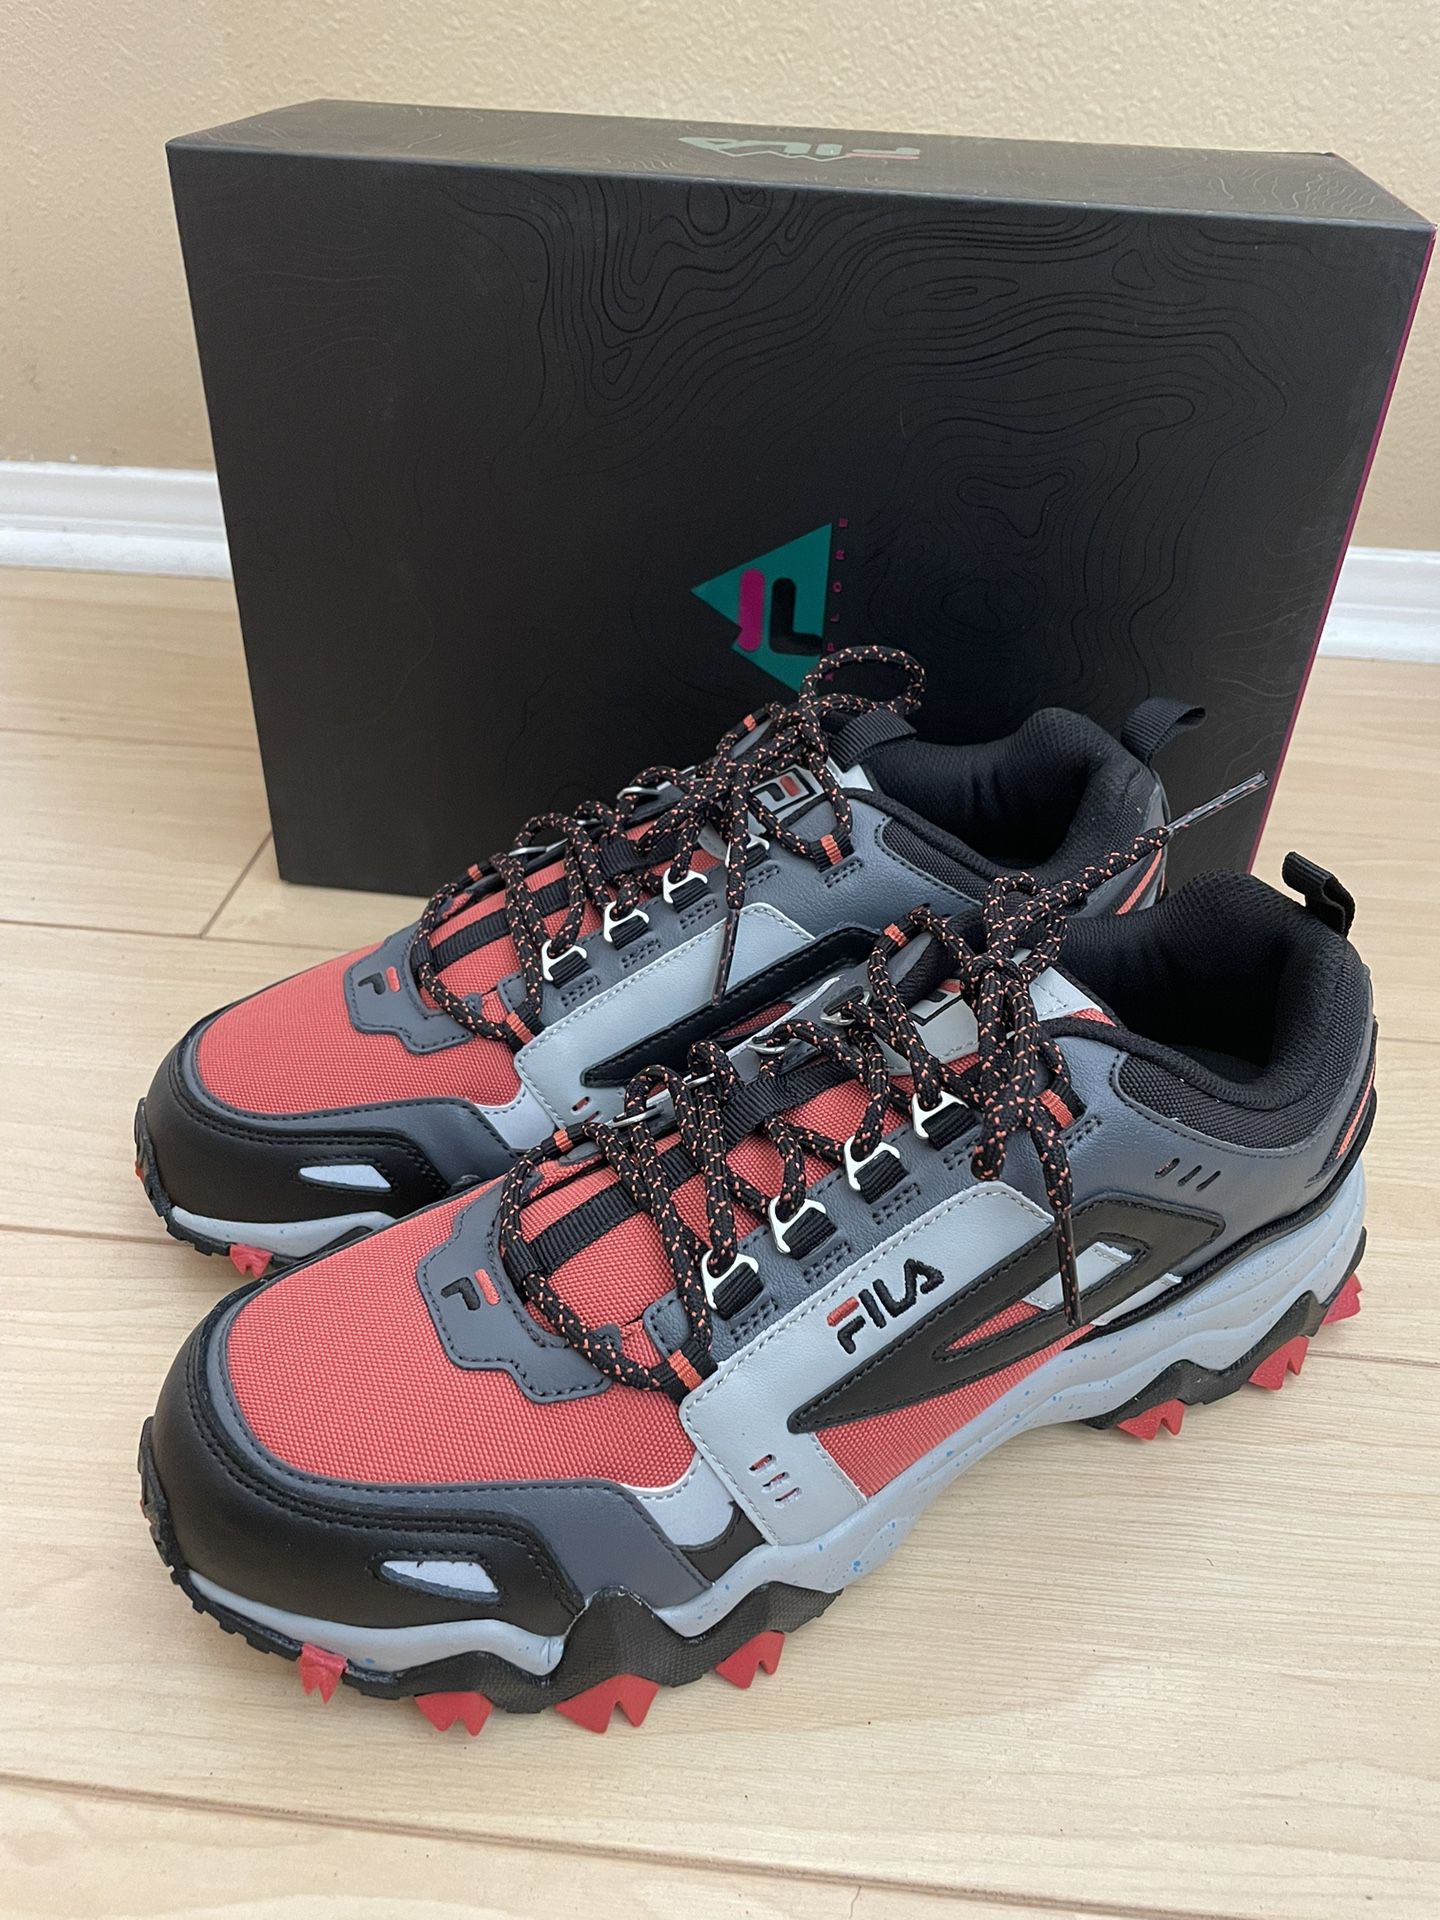 New Hiking Shoes Sneakers 11.5 for Sale in Chino, CA - OfferUp